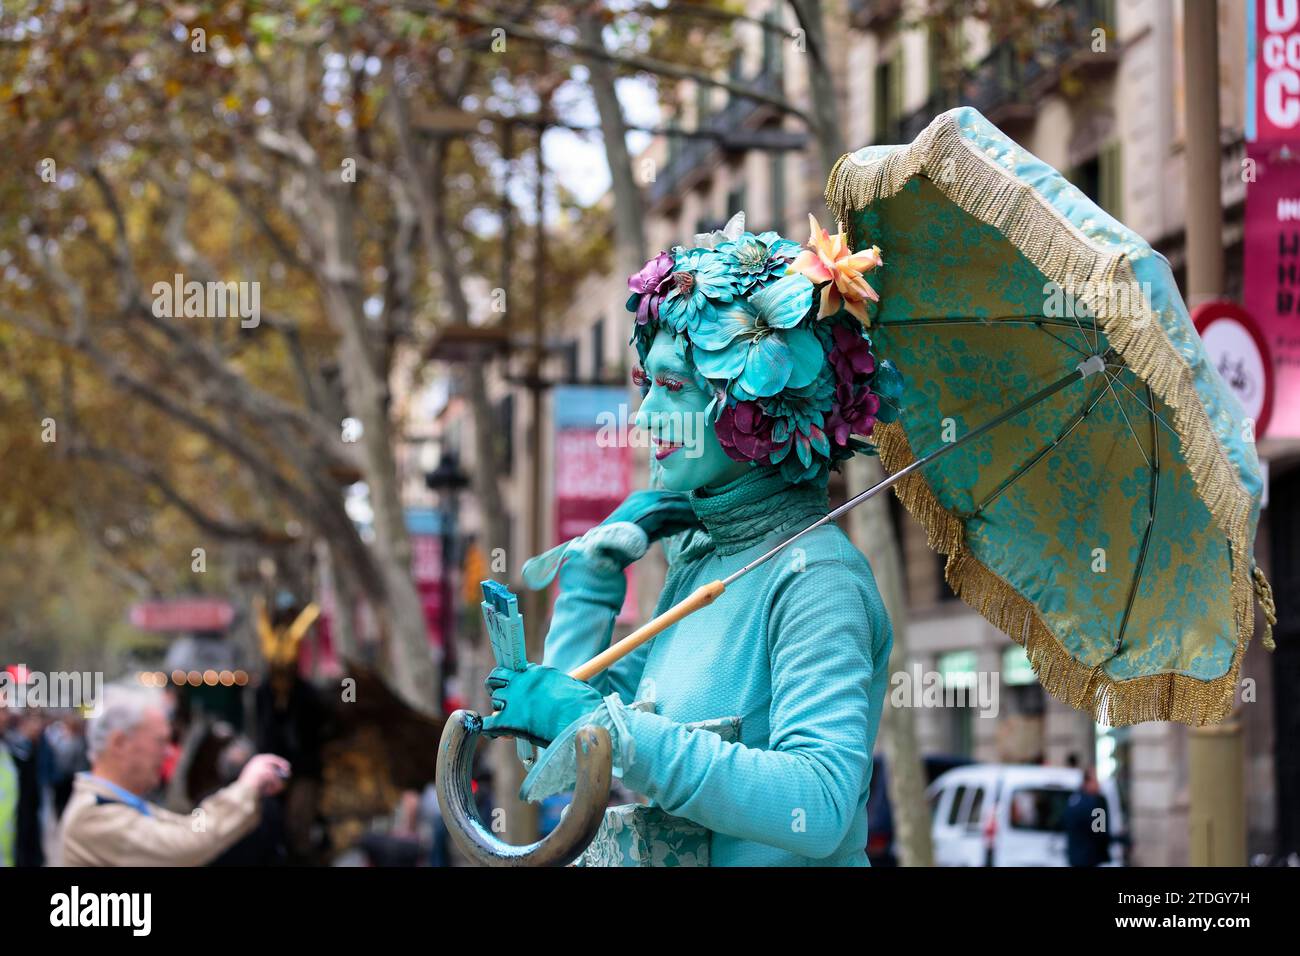 Street performer, mime, living statue of a Dali lady, fantasy figure with parasol and flowers as wig, blue make-up, passers-by, La Rambla, Ramblas Stock Photo